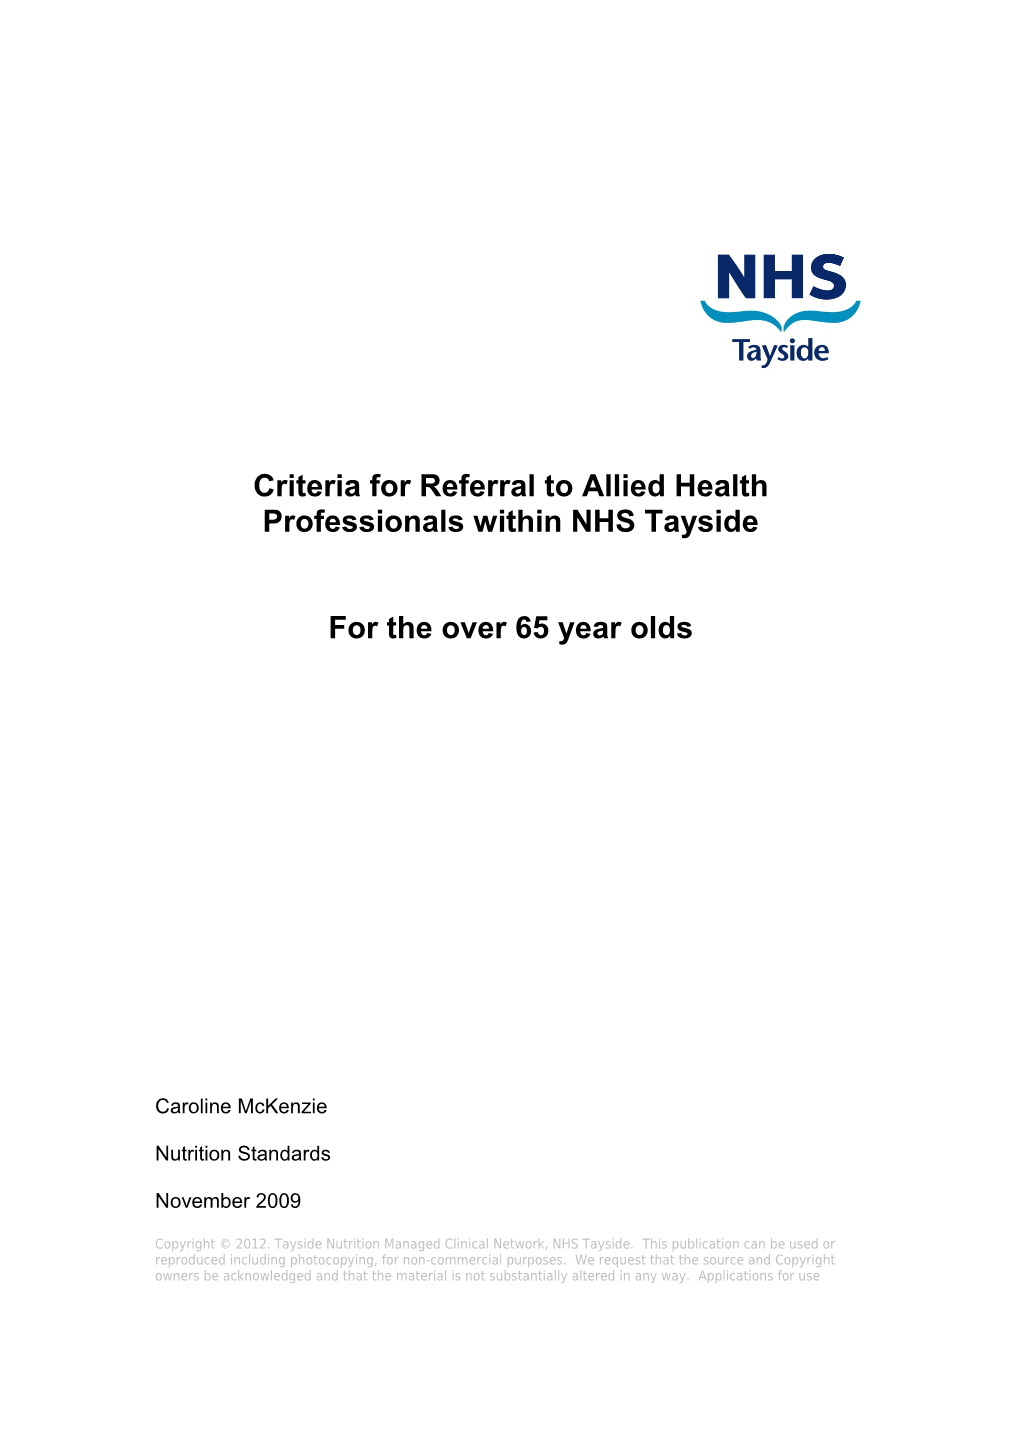 Criteria for Referral to Allied Health Professionals